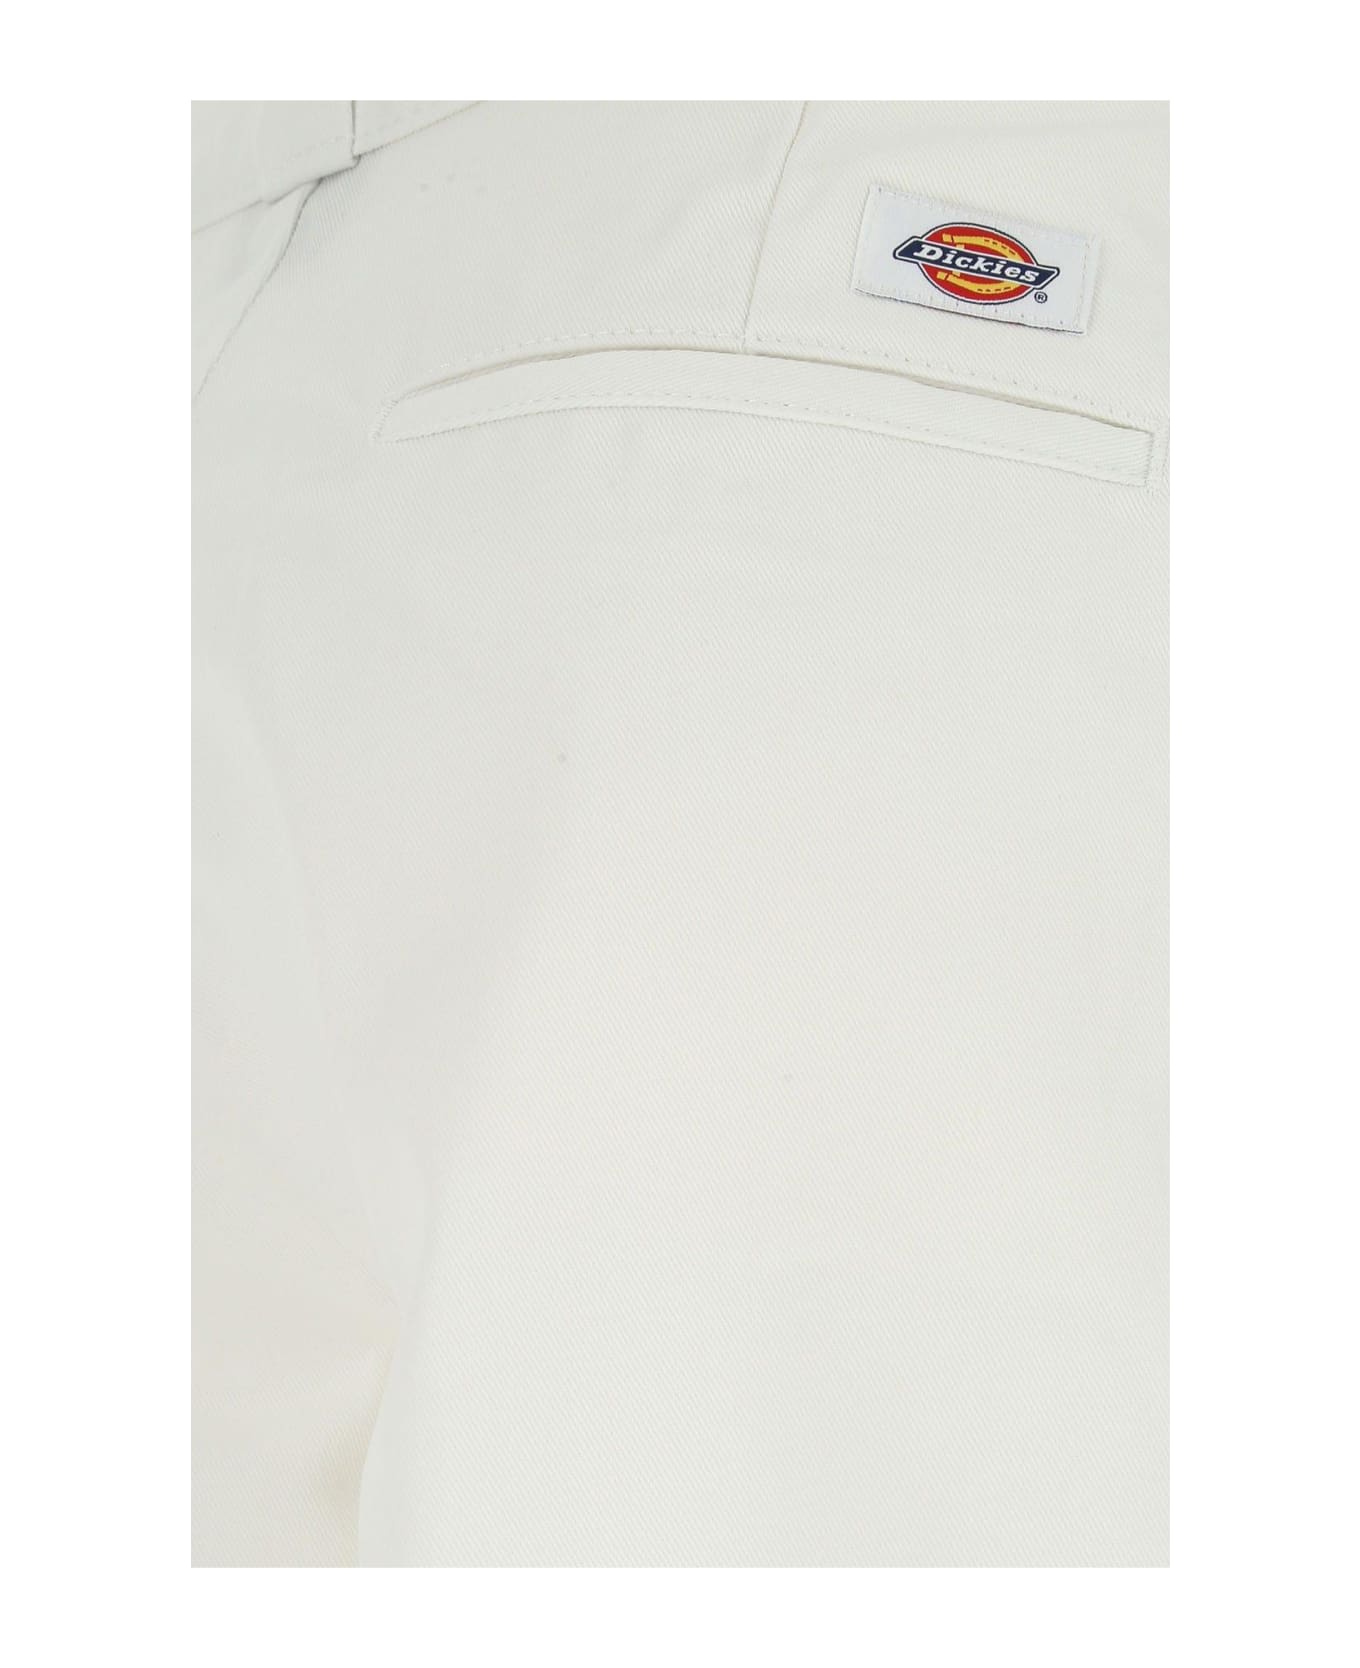 Dickies White Polyester Blend Pant - WHITE ボトムス